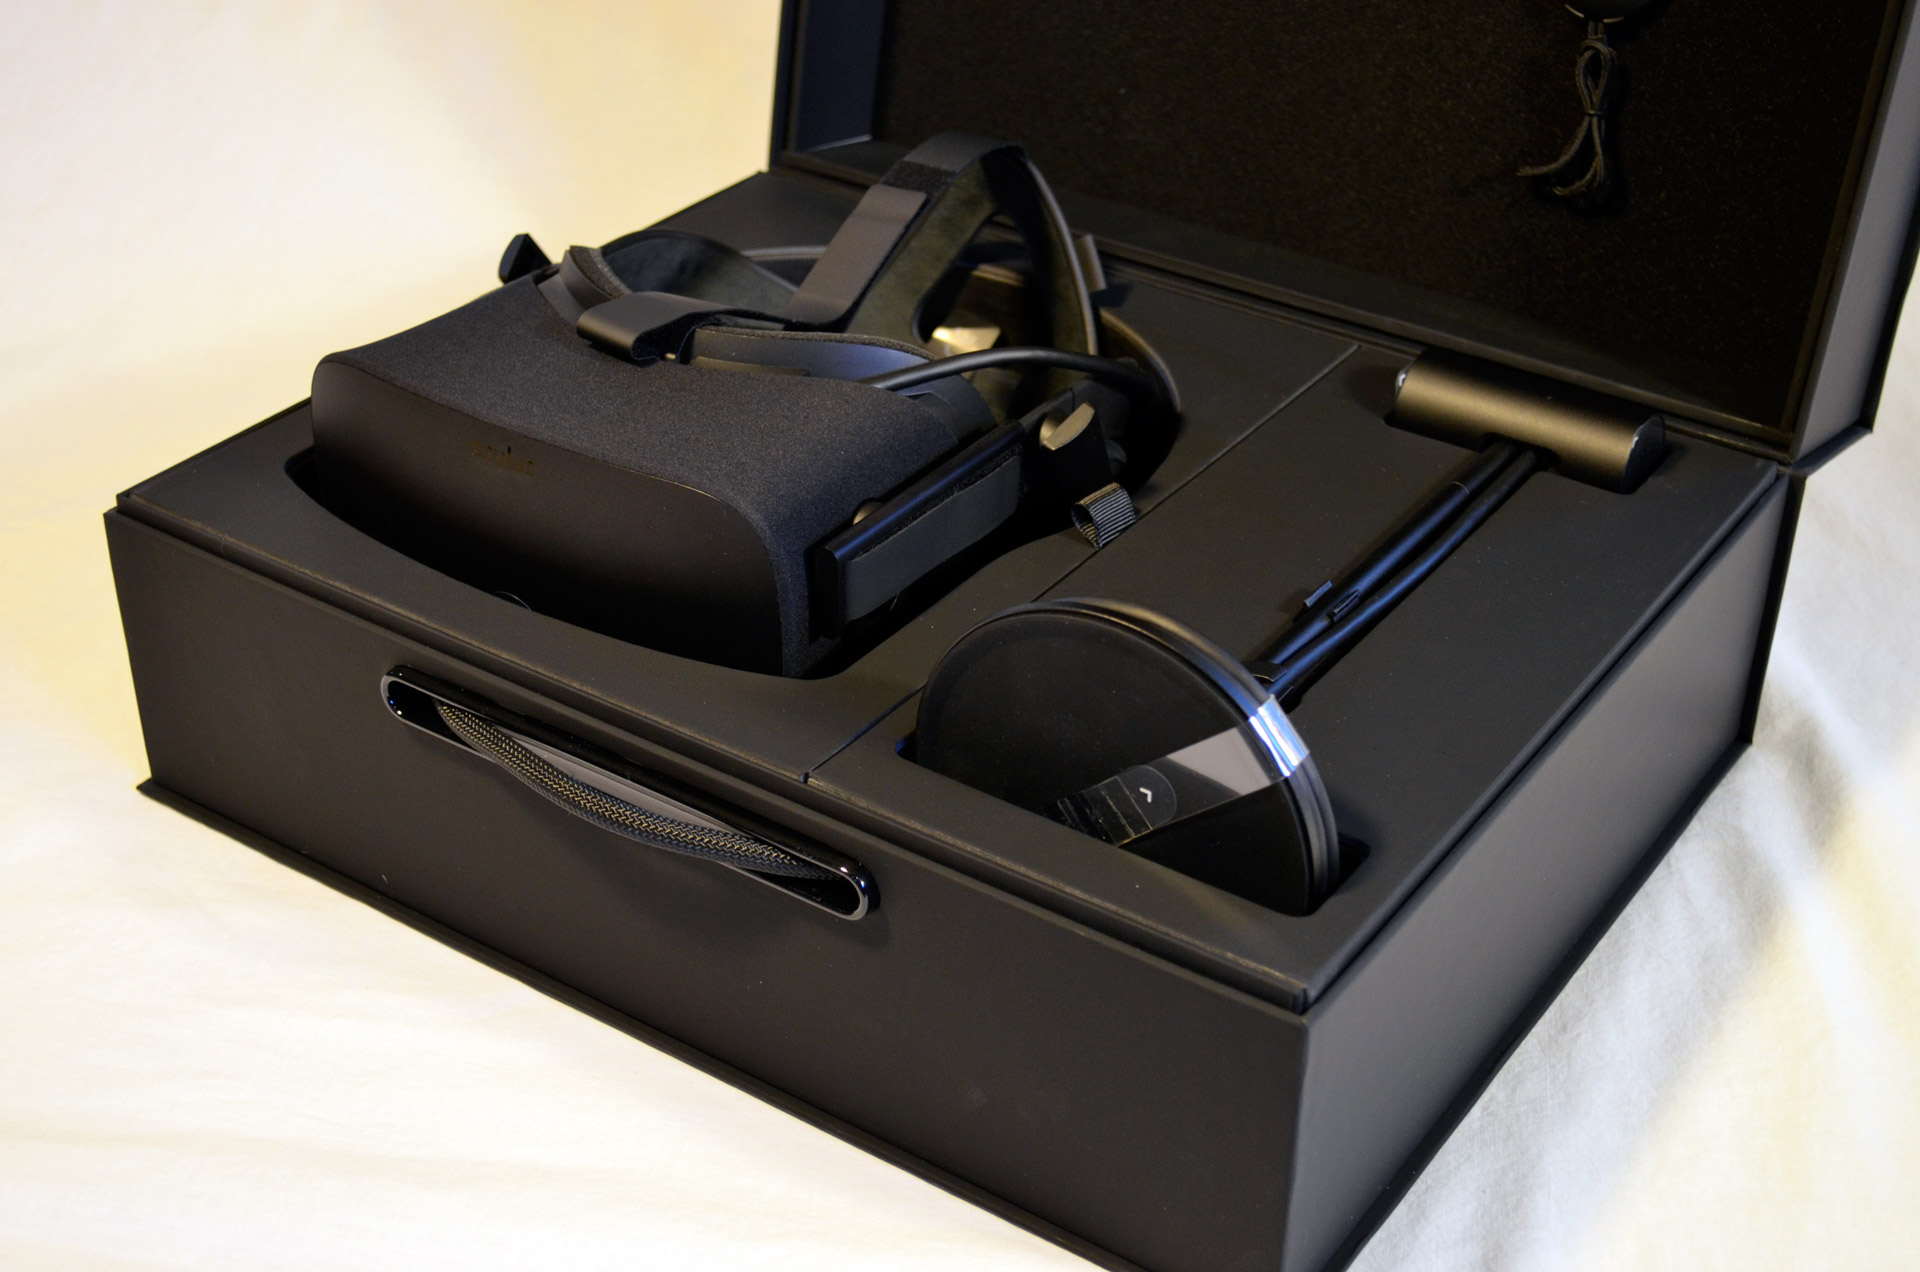 Oculus Rift Components Cost Around $200, New Teardown Suggests Road to